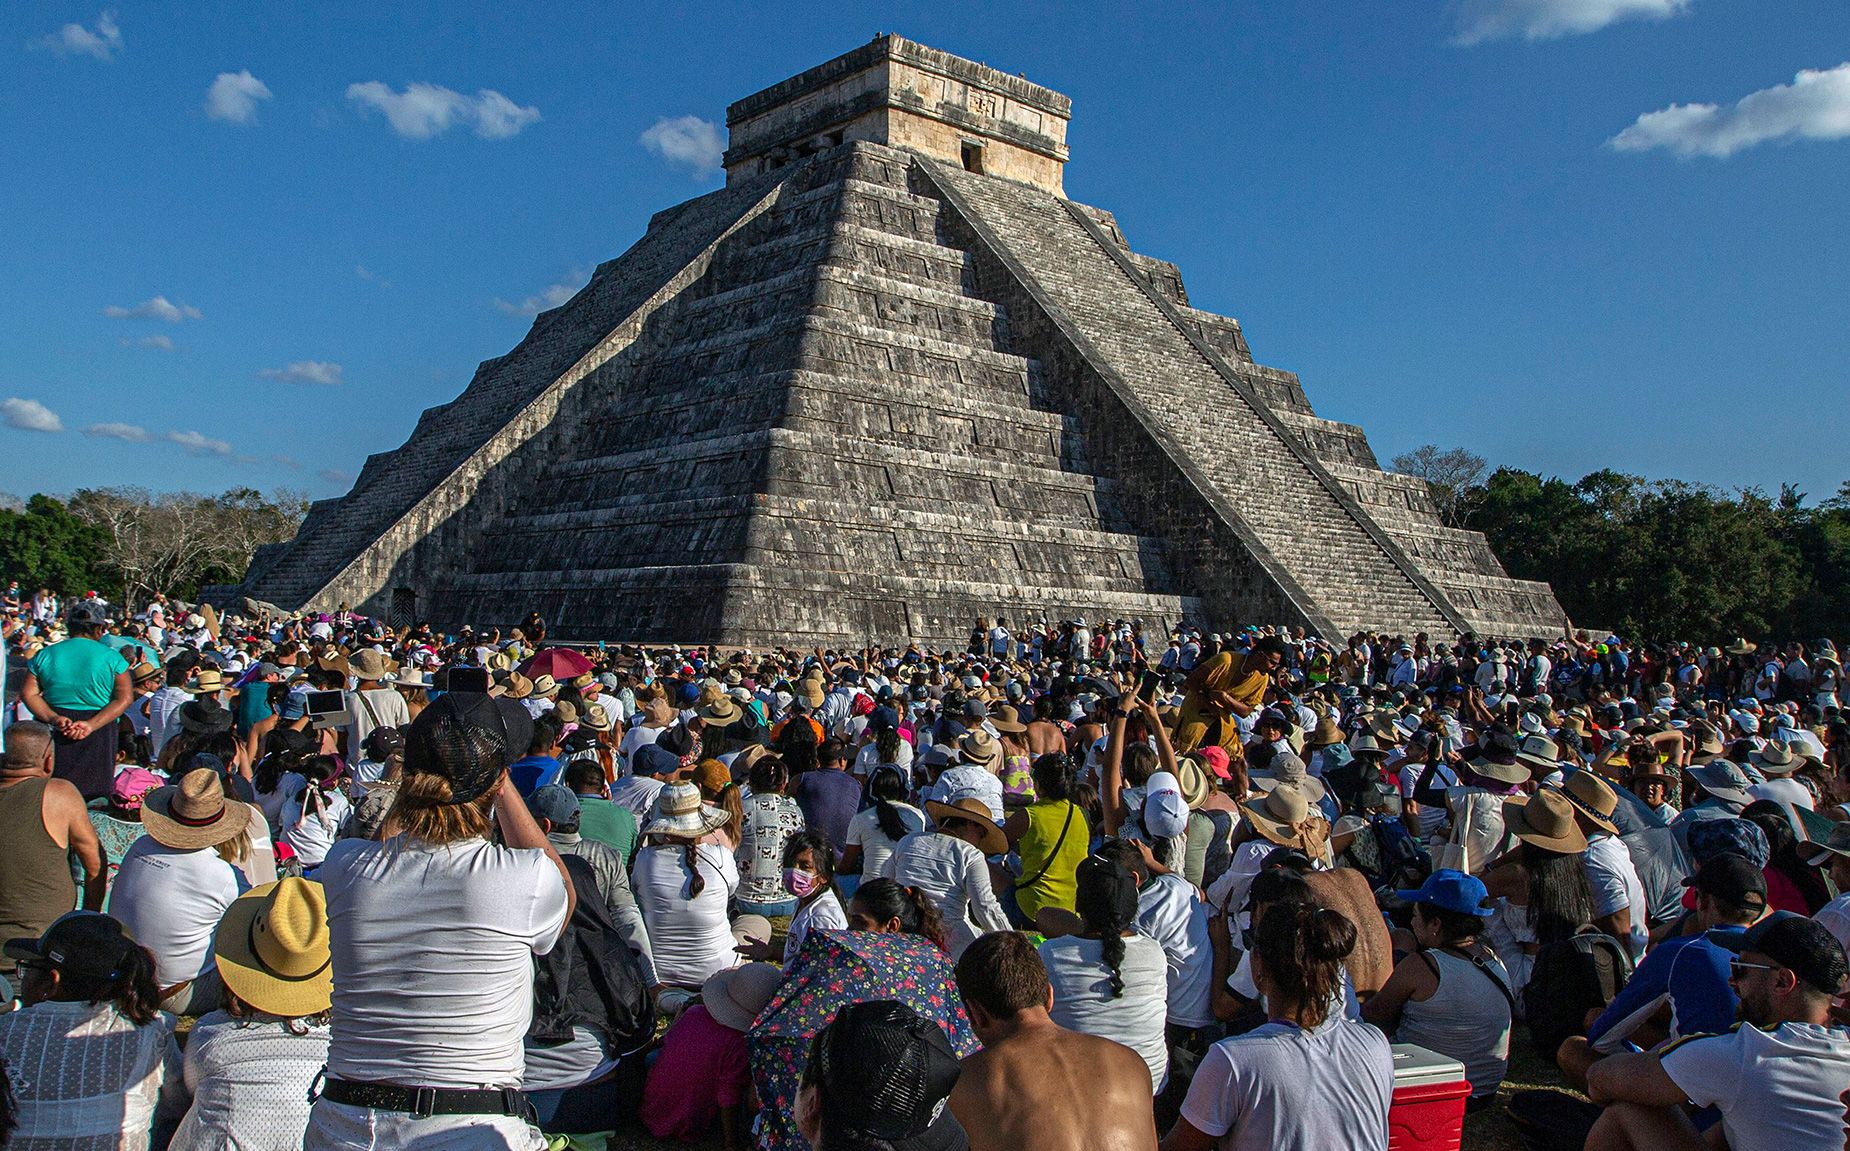 People surround the Kukulcan Pyramid at the Mayan archaeological site of Chichén Itzá in Yucatan State, Mexico, during the celebration of the spring equinox in 2023.